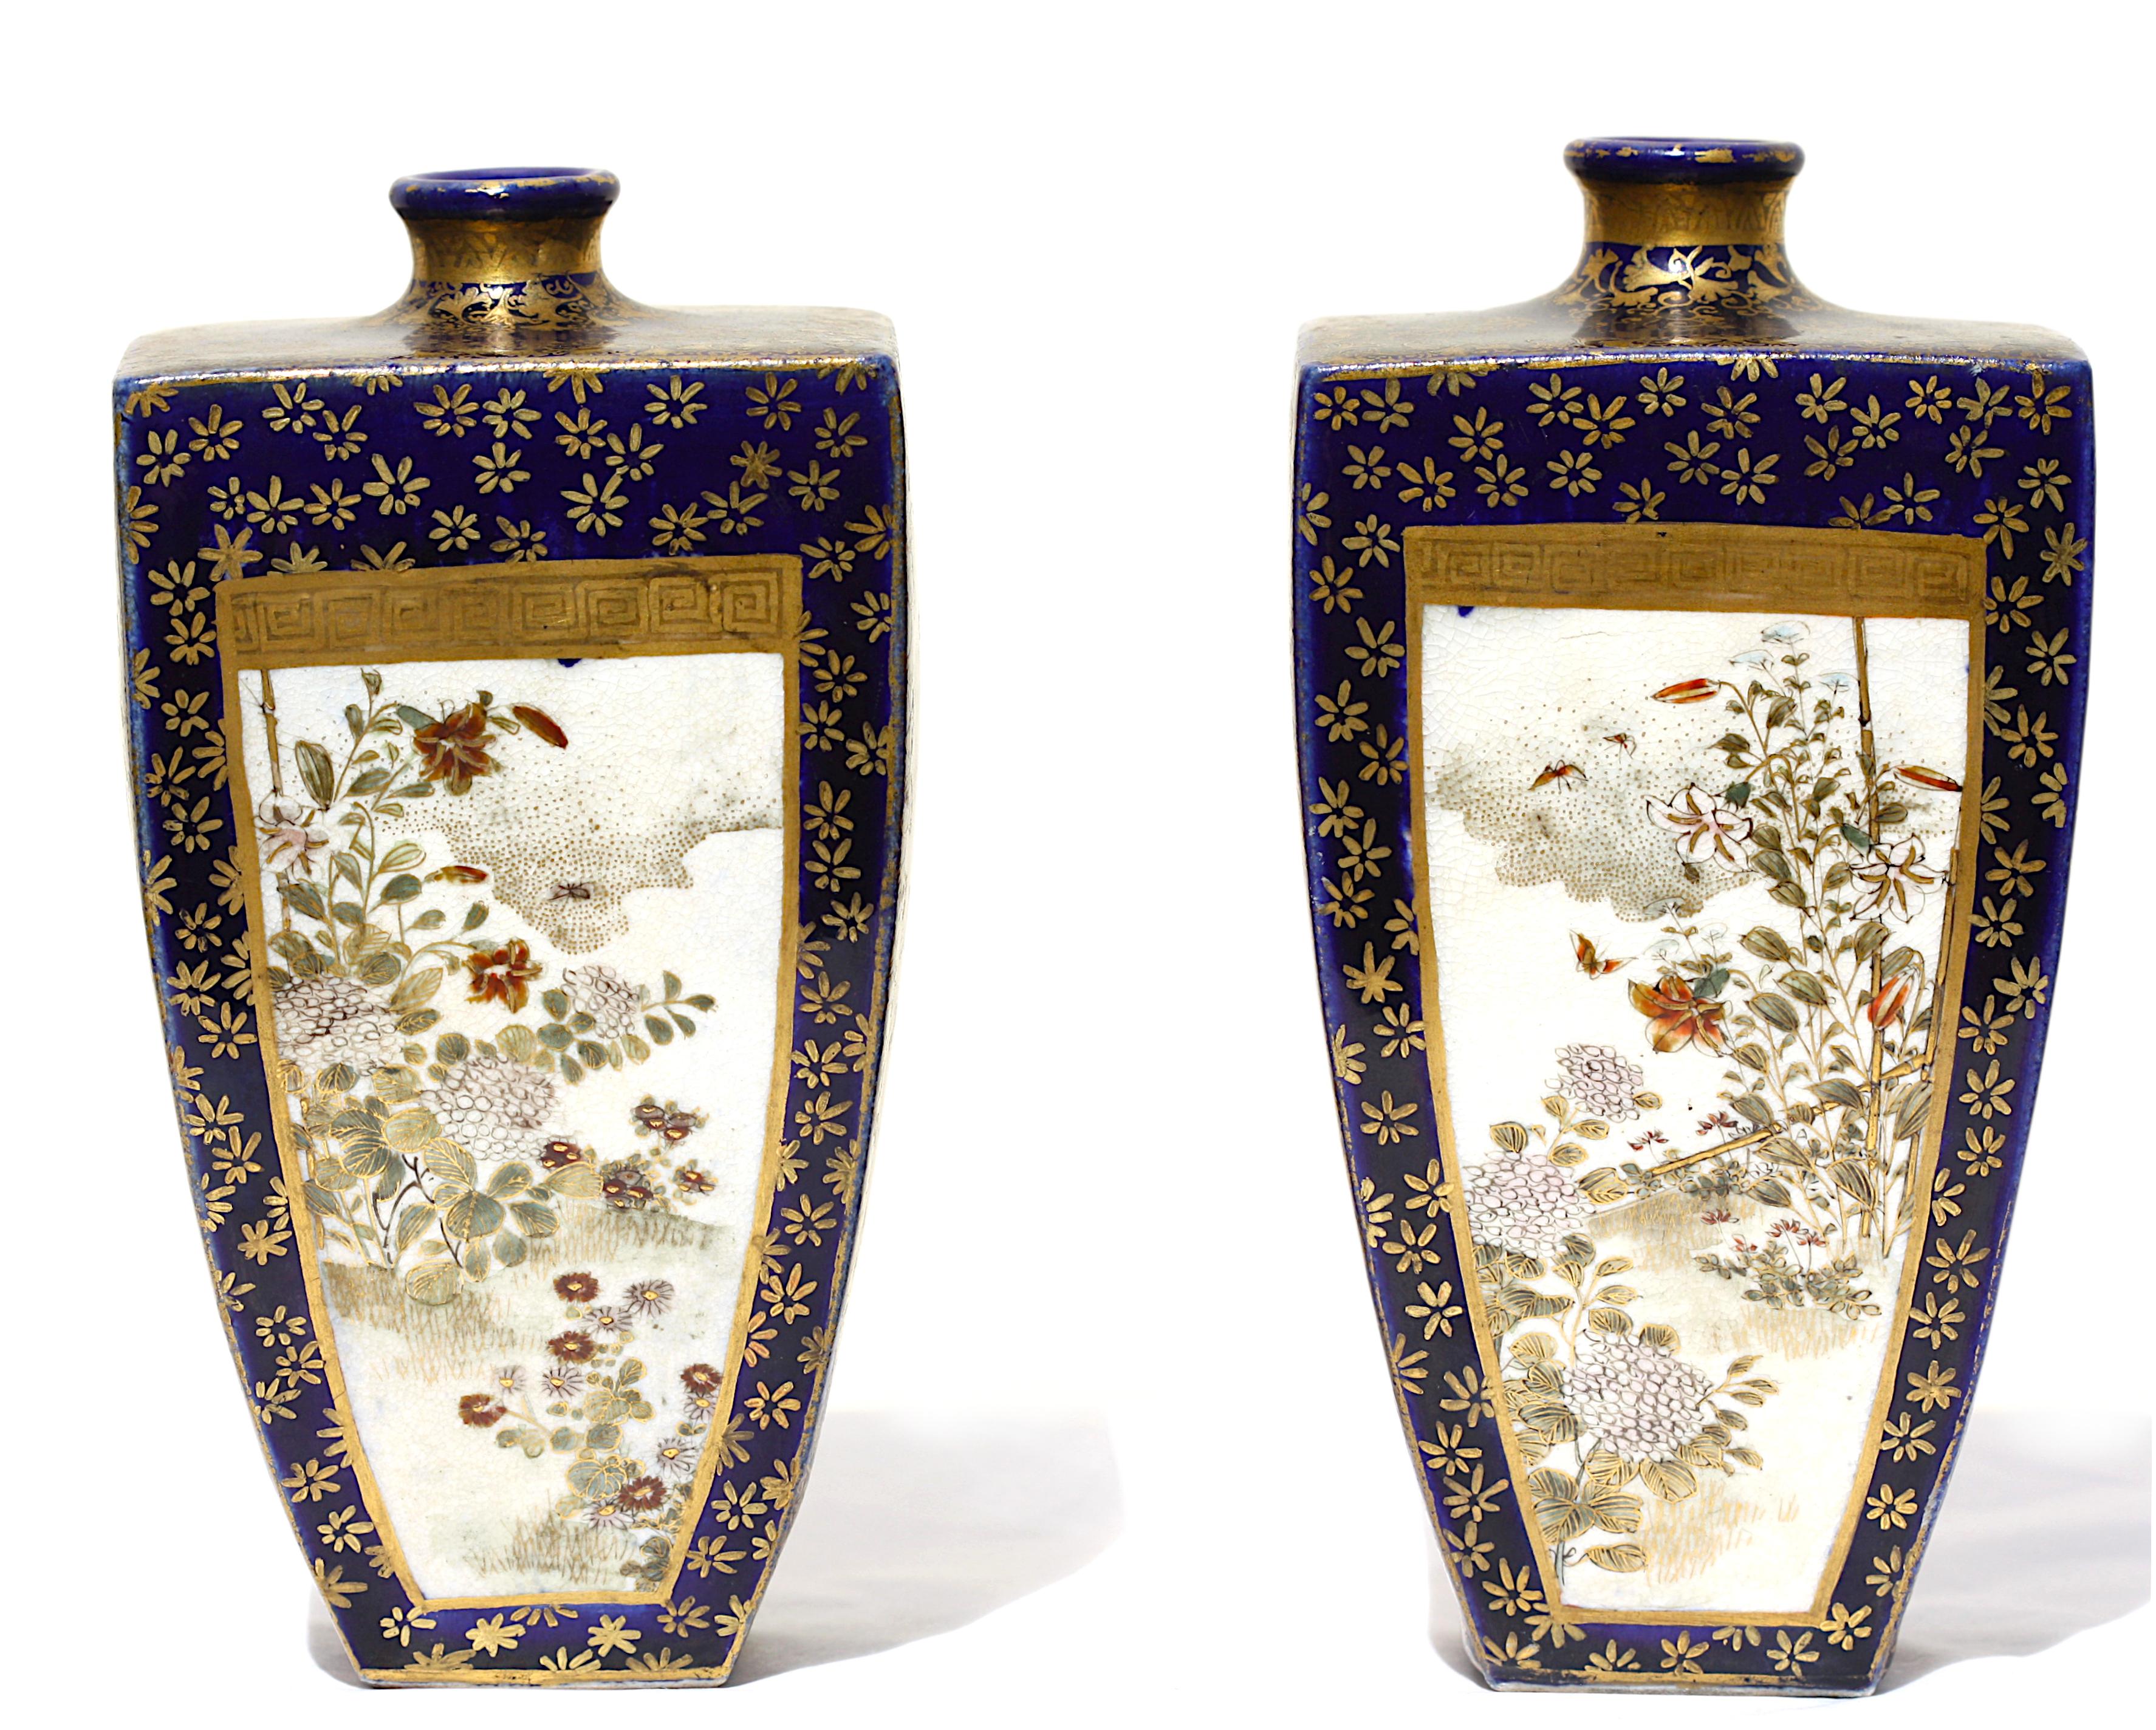 
A Pair Satsuma earthenware vases by Kinkozan, Meiji period
of square section, decorated with birds and flowers alternating with figures, all reserved on a midnight-blue ground with floral designs, each signed Kinkozan zo 
Height 12.7 cm., 5.5 in.
3